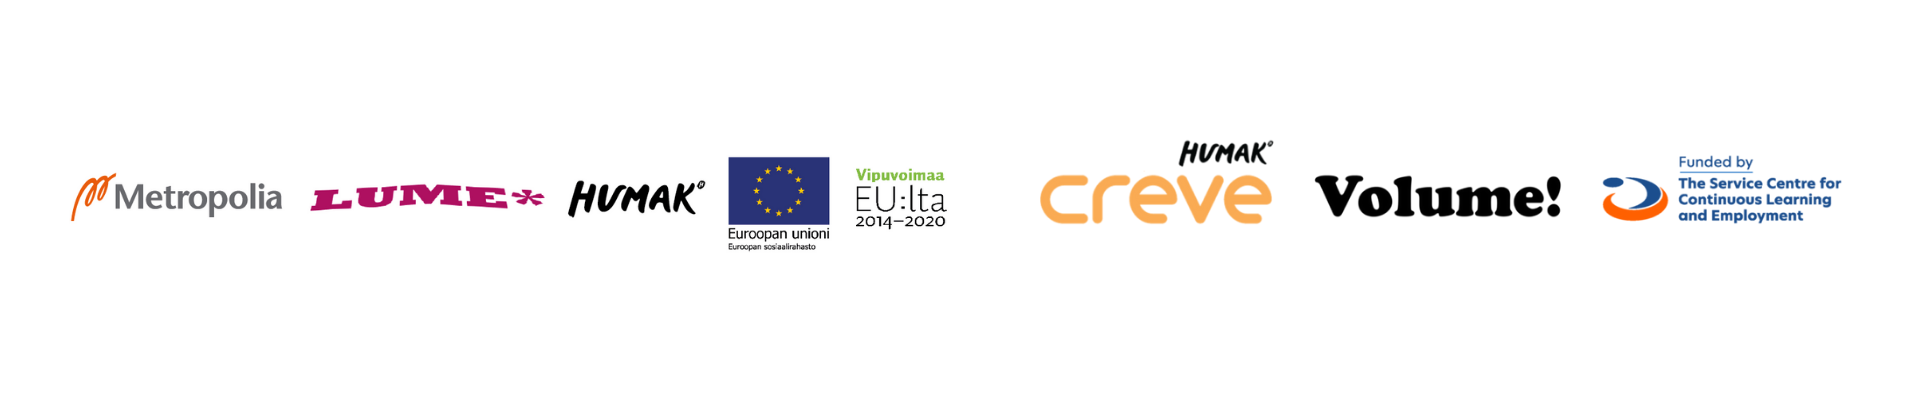 Logos: Metropolia, Lume, Humak, Europe Union and Leverage from EU, Creve, Volume and Funded by The Service Centre for Continuous Learning and Employment.